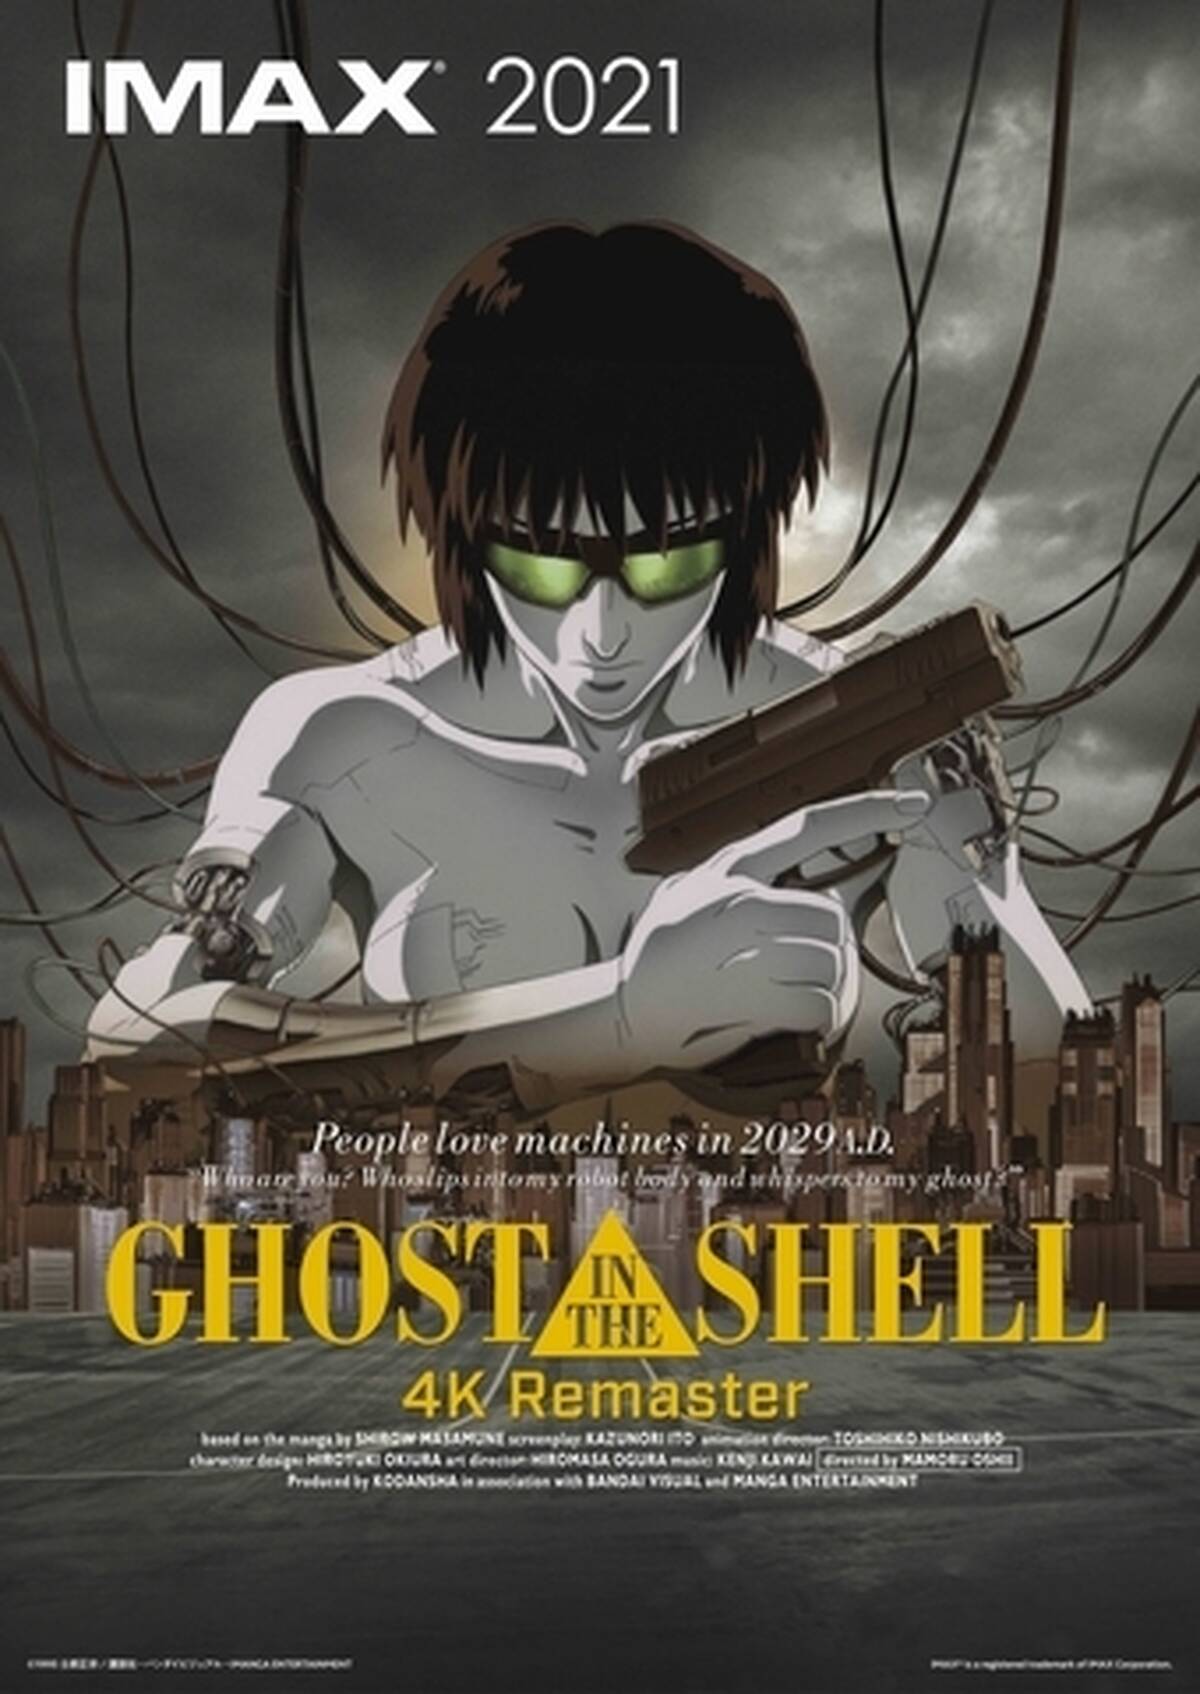 Ghost In The Shell ４k版レビュー アキバ総研